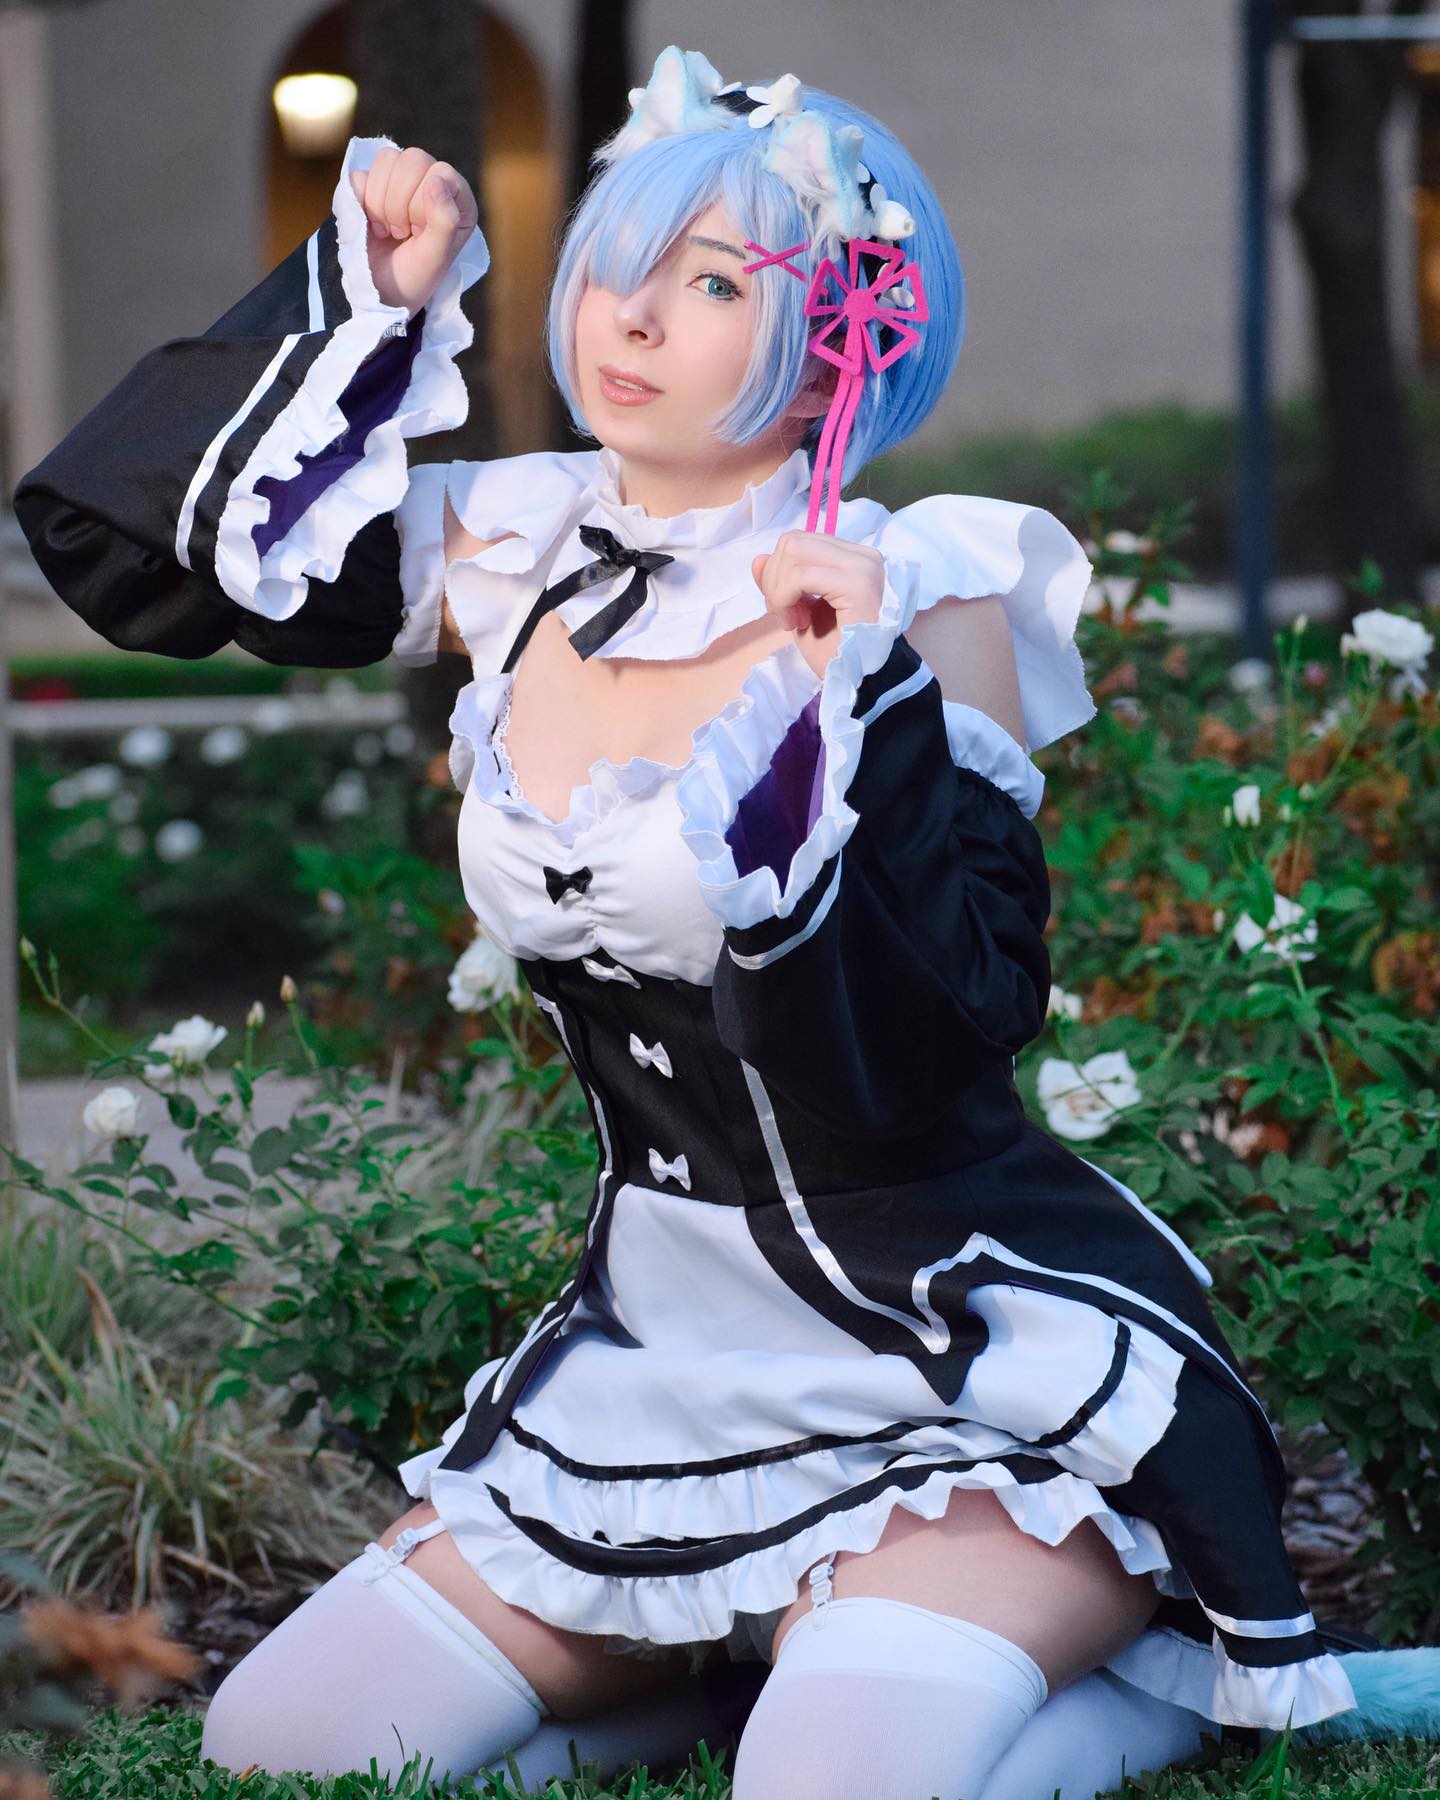 Rem from Re:Zero 💙 Who’s looking for a wholesome cat girl? 🐱

#rezero #rem #remcosplay #anime #animegirl anime cosplay maid dress